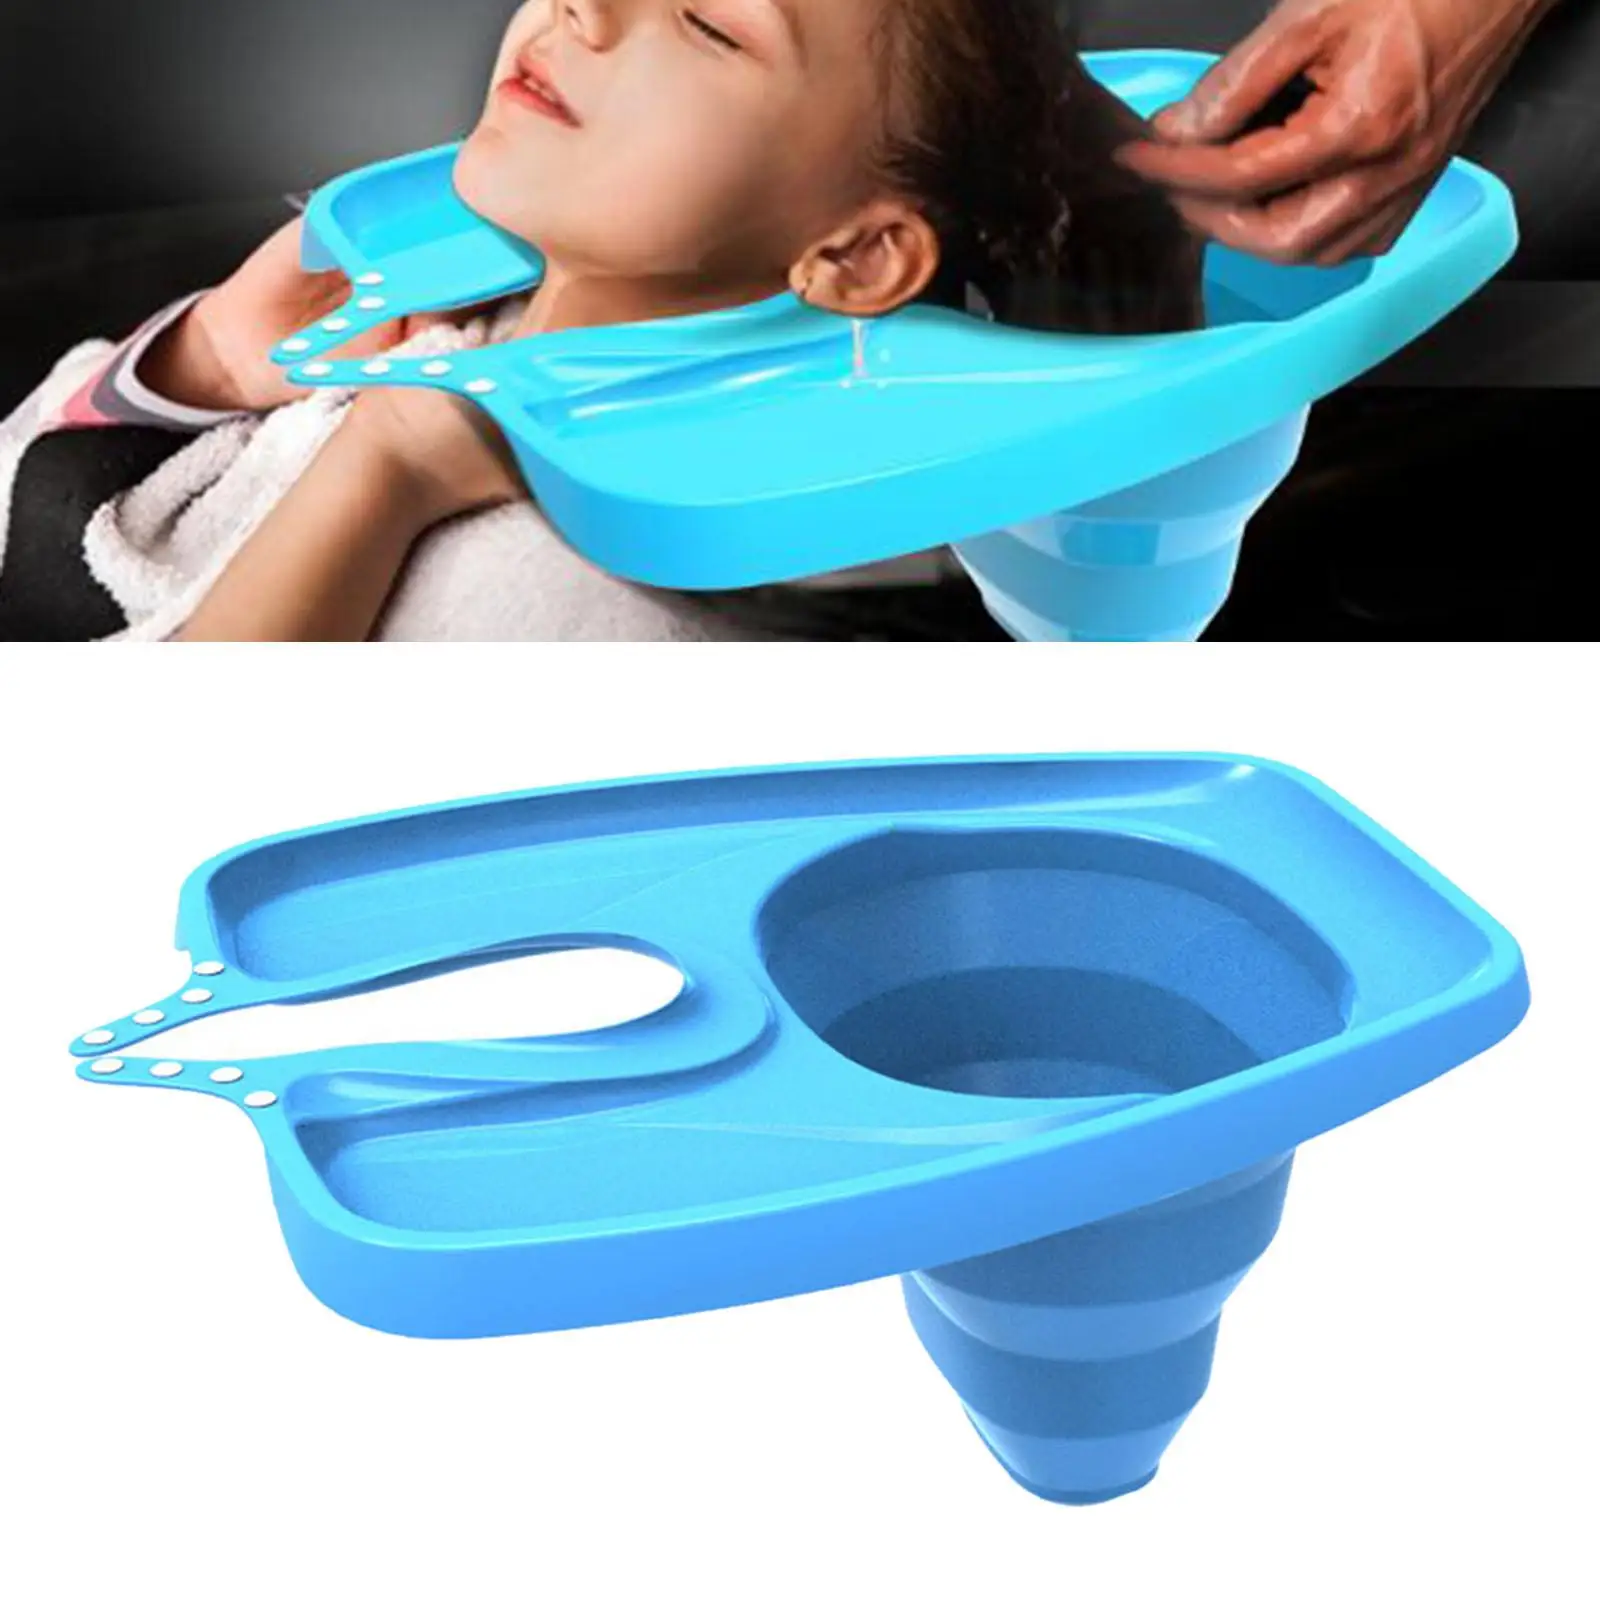 Hanging Hair Washing Basin Tray Foldable Portable Ergonomics Shampoo Sink Mobile Tray for Hair Salon Pregnant Teen Old Patients